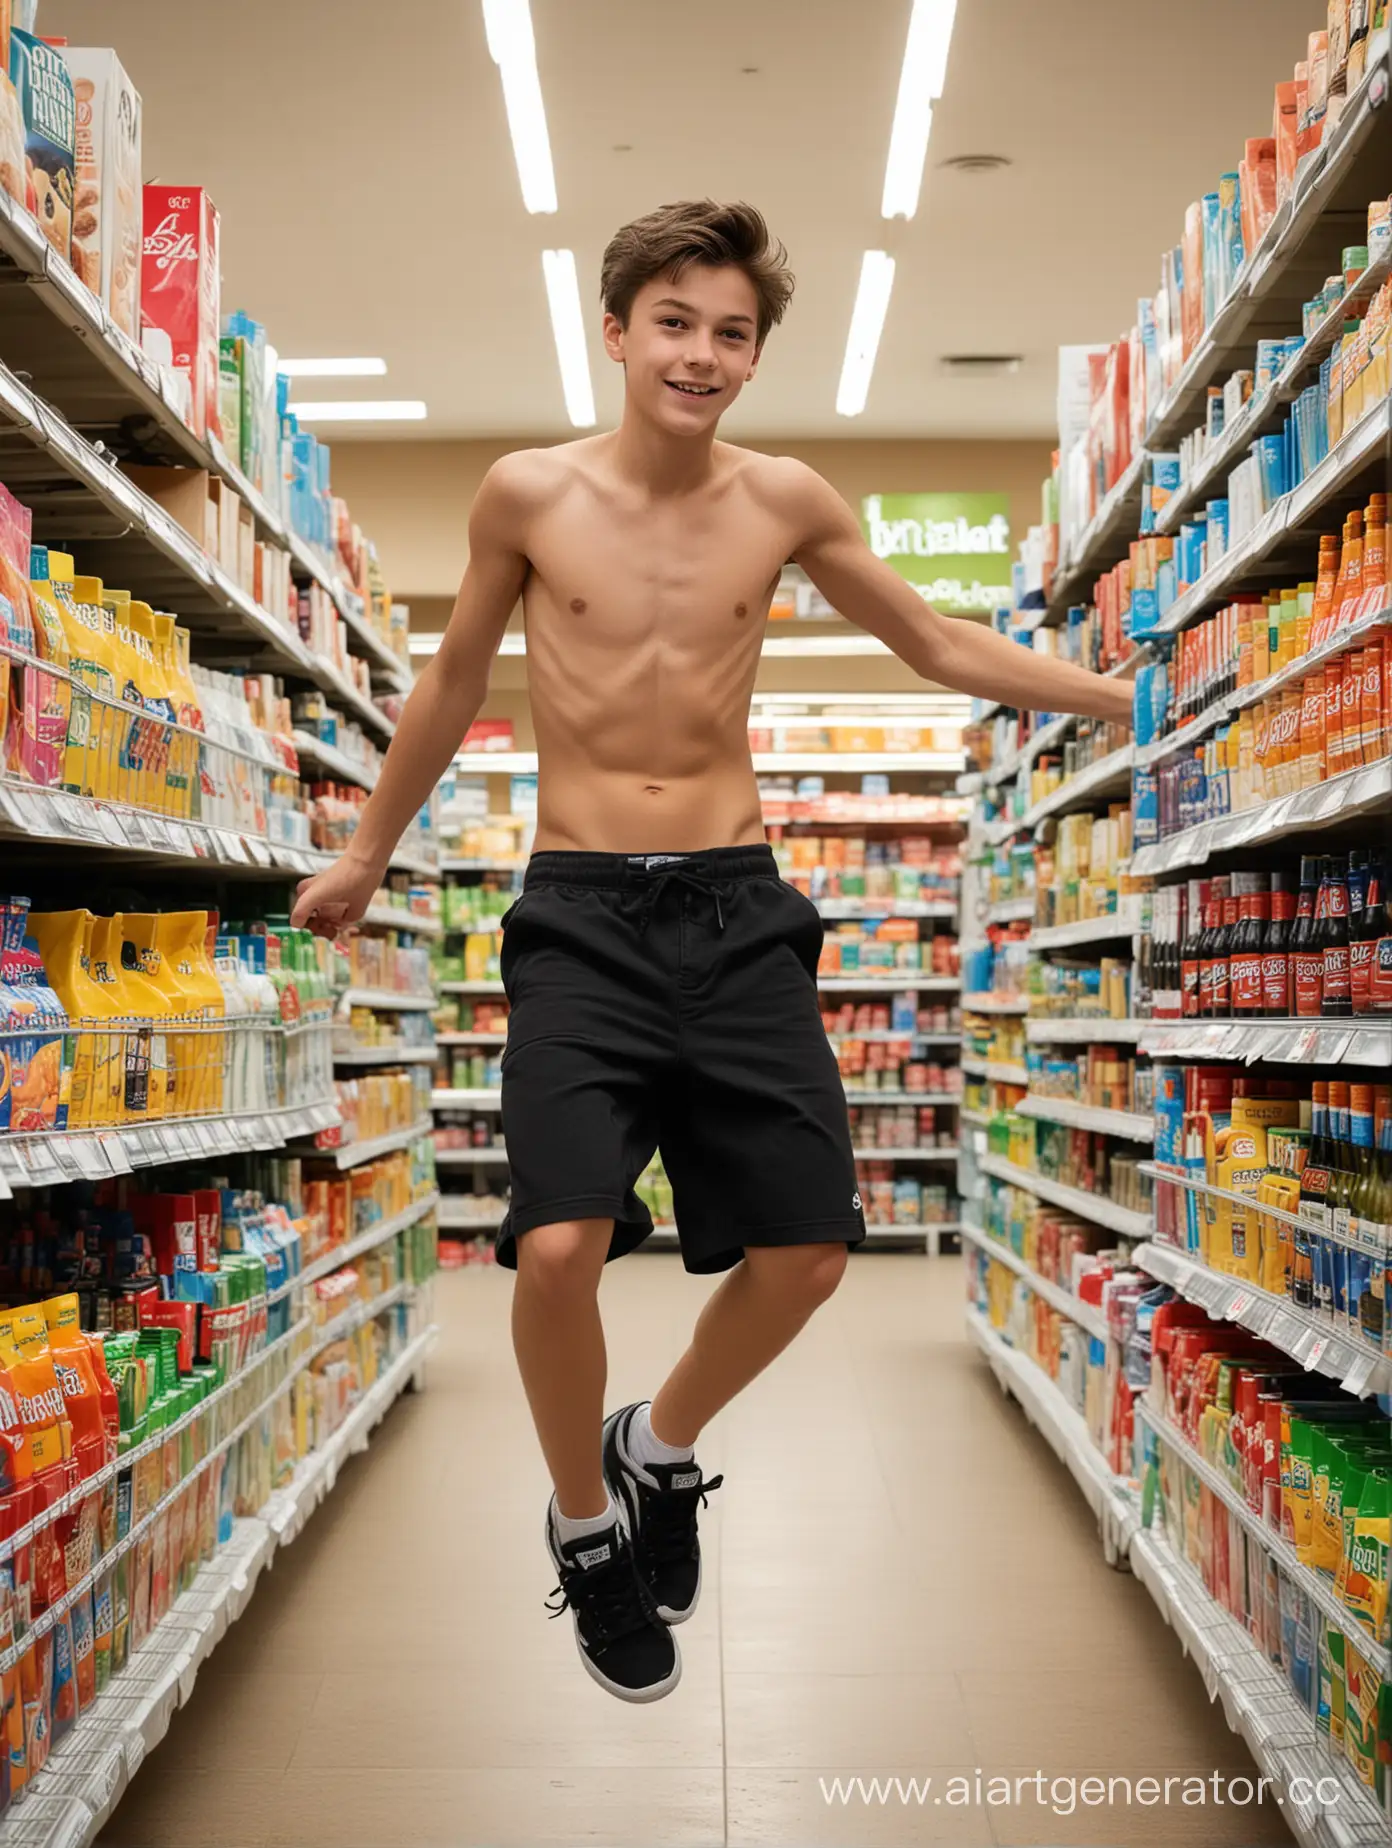 A cute, slim, barechested 14-year-old boy in black shorts and sneakers doing a flip in a crowded supermarket.